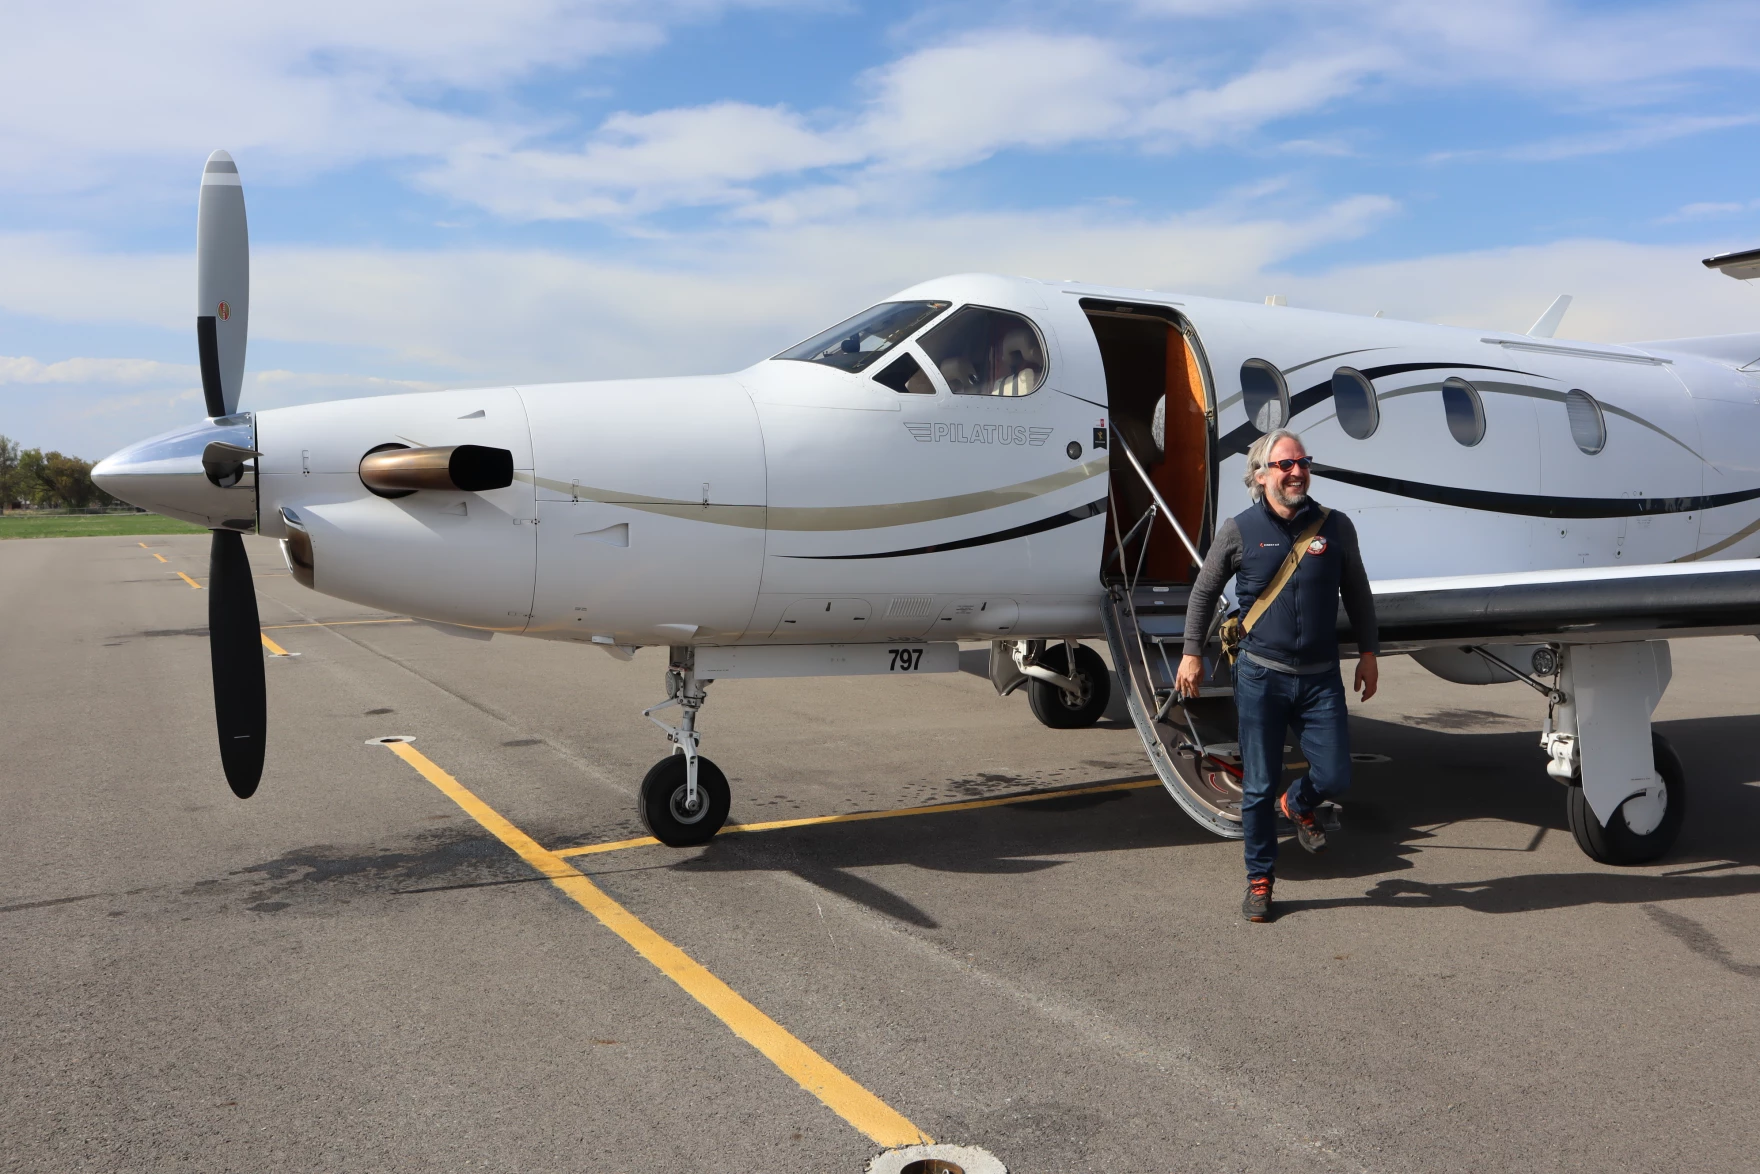 KinectAir CEO Jonathan Evans disembarks from a Pilatus PC-12 aircraft in Kalispell after joining a customer's flight from Vancouver, Washington